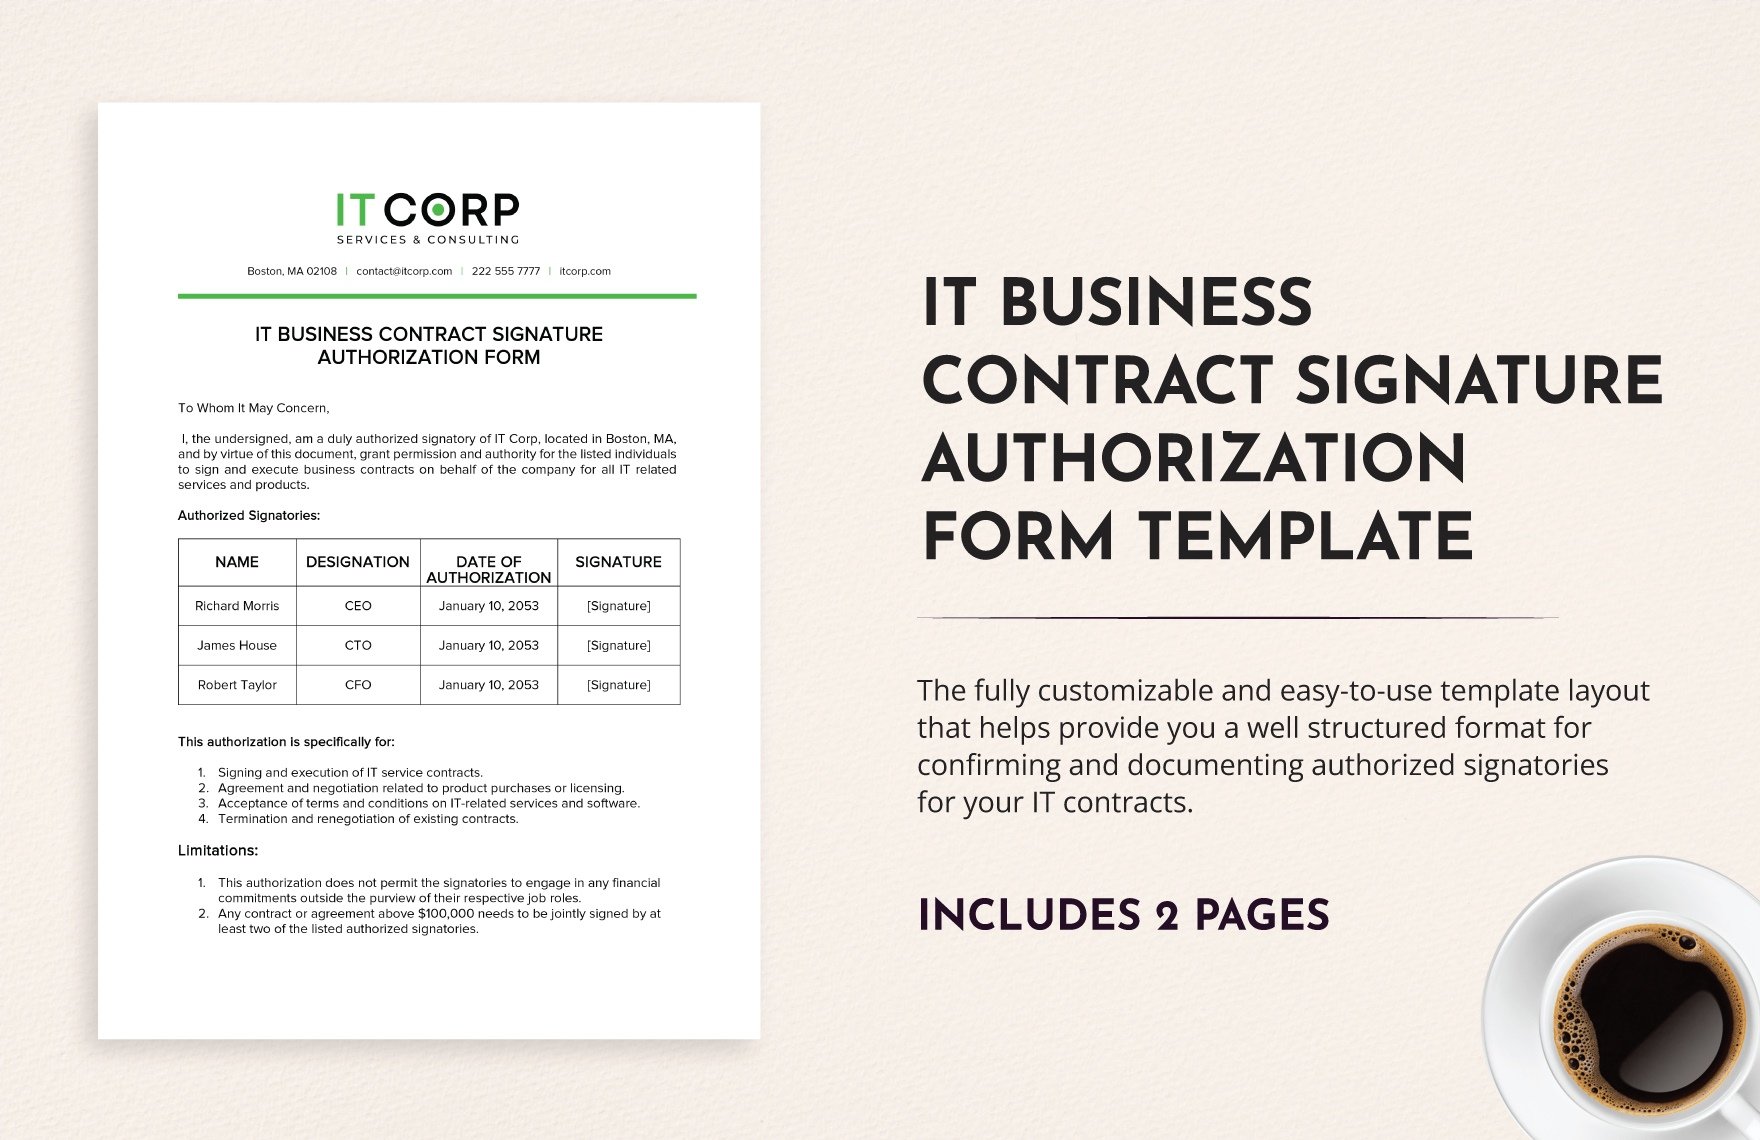 IT Business Contract Signature Authorization Form Template in Word, Google Docs, PDF